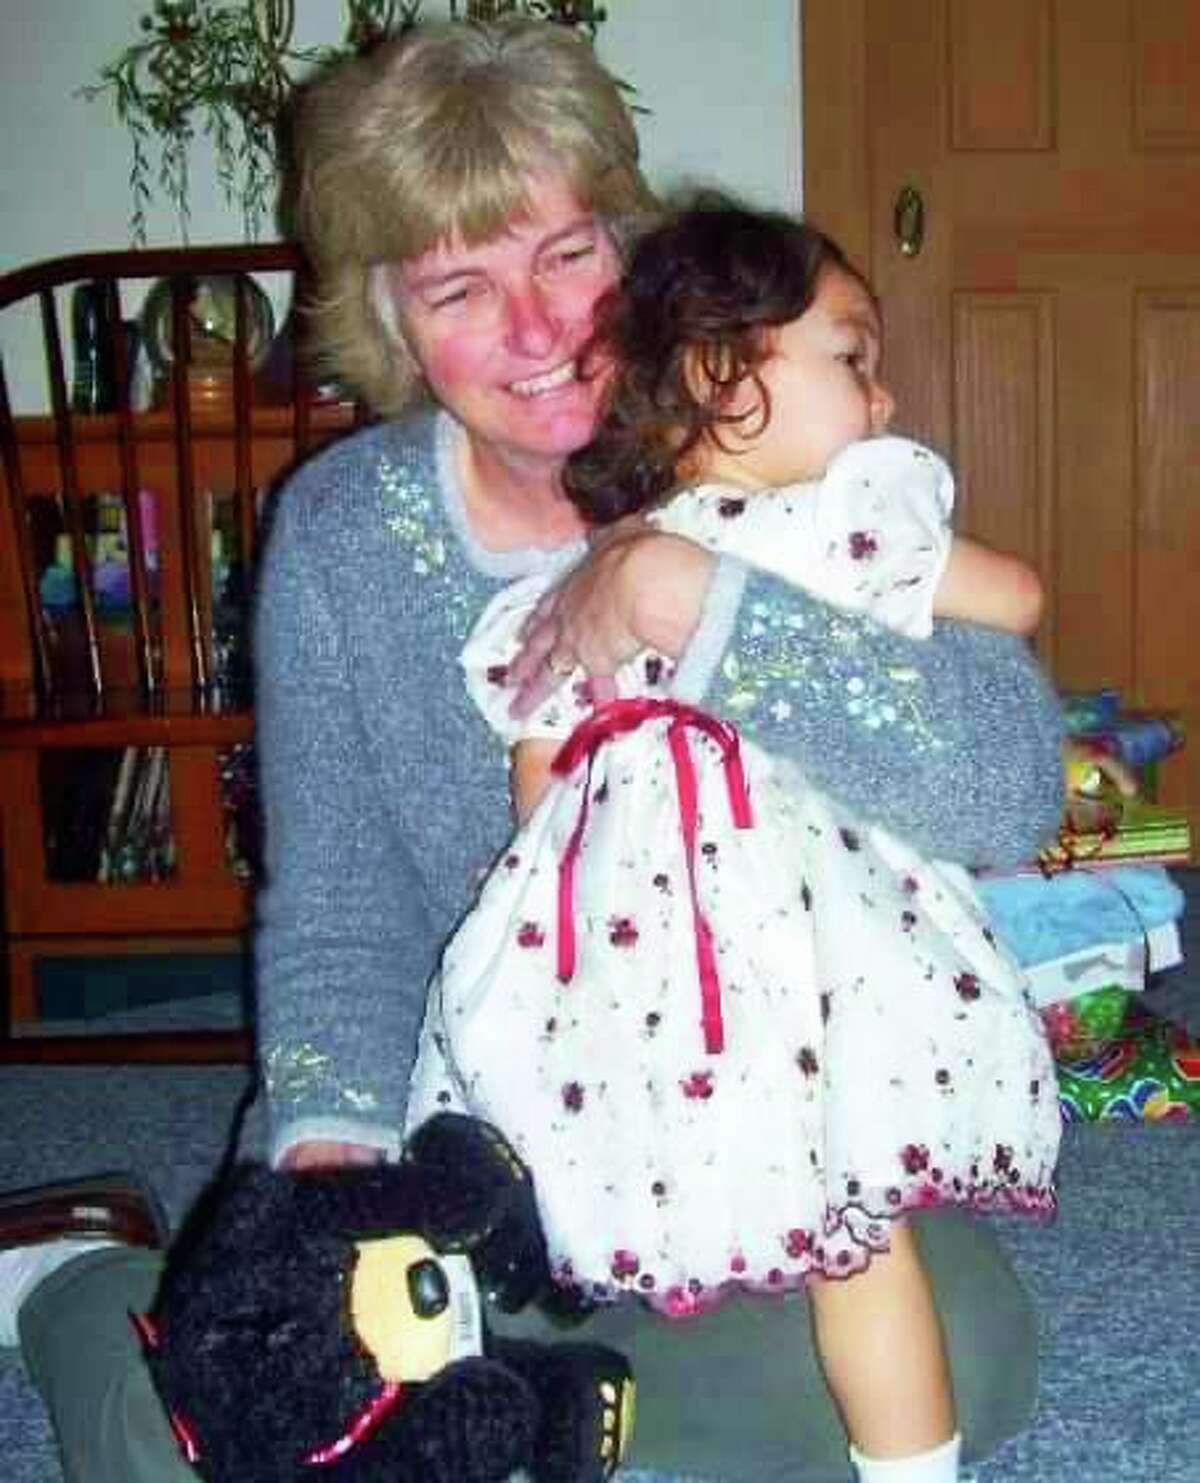 Colleen Watrous cuddles up to her granddaughter Alaina Watrous.